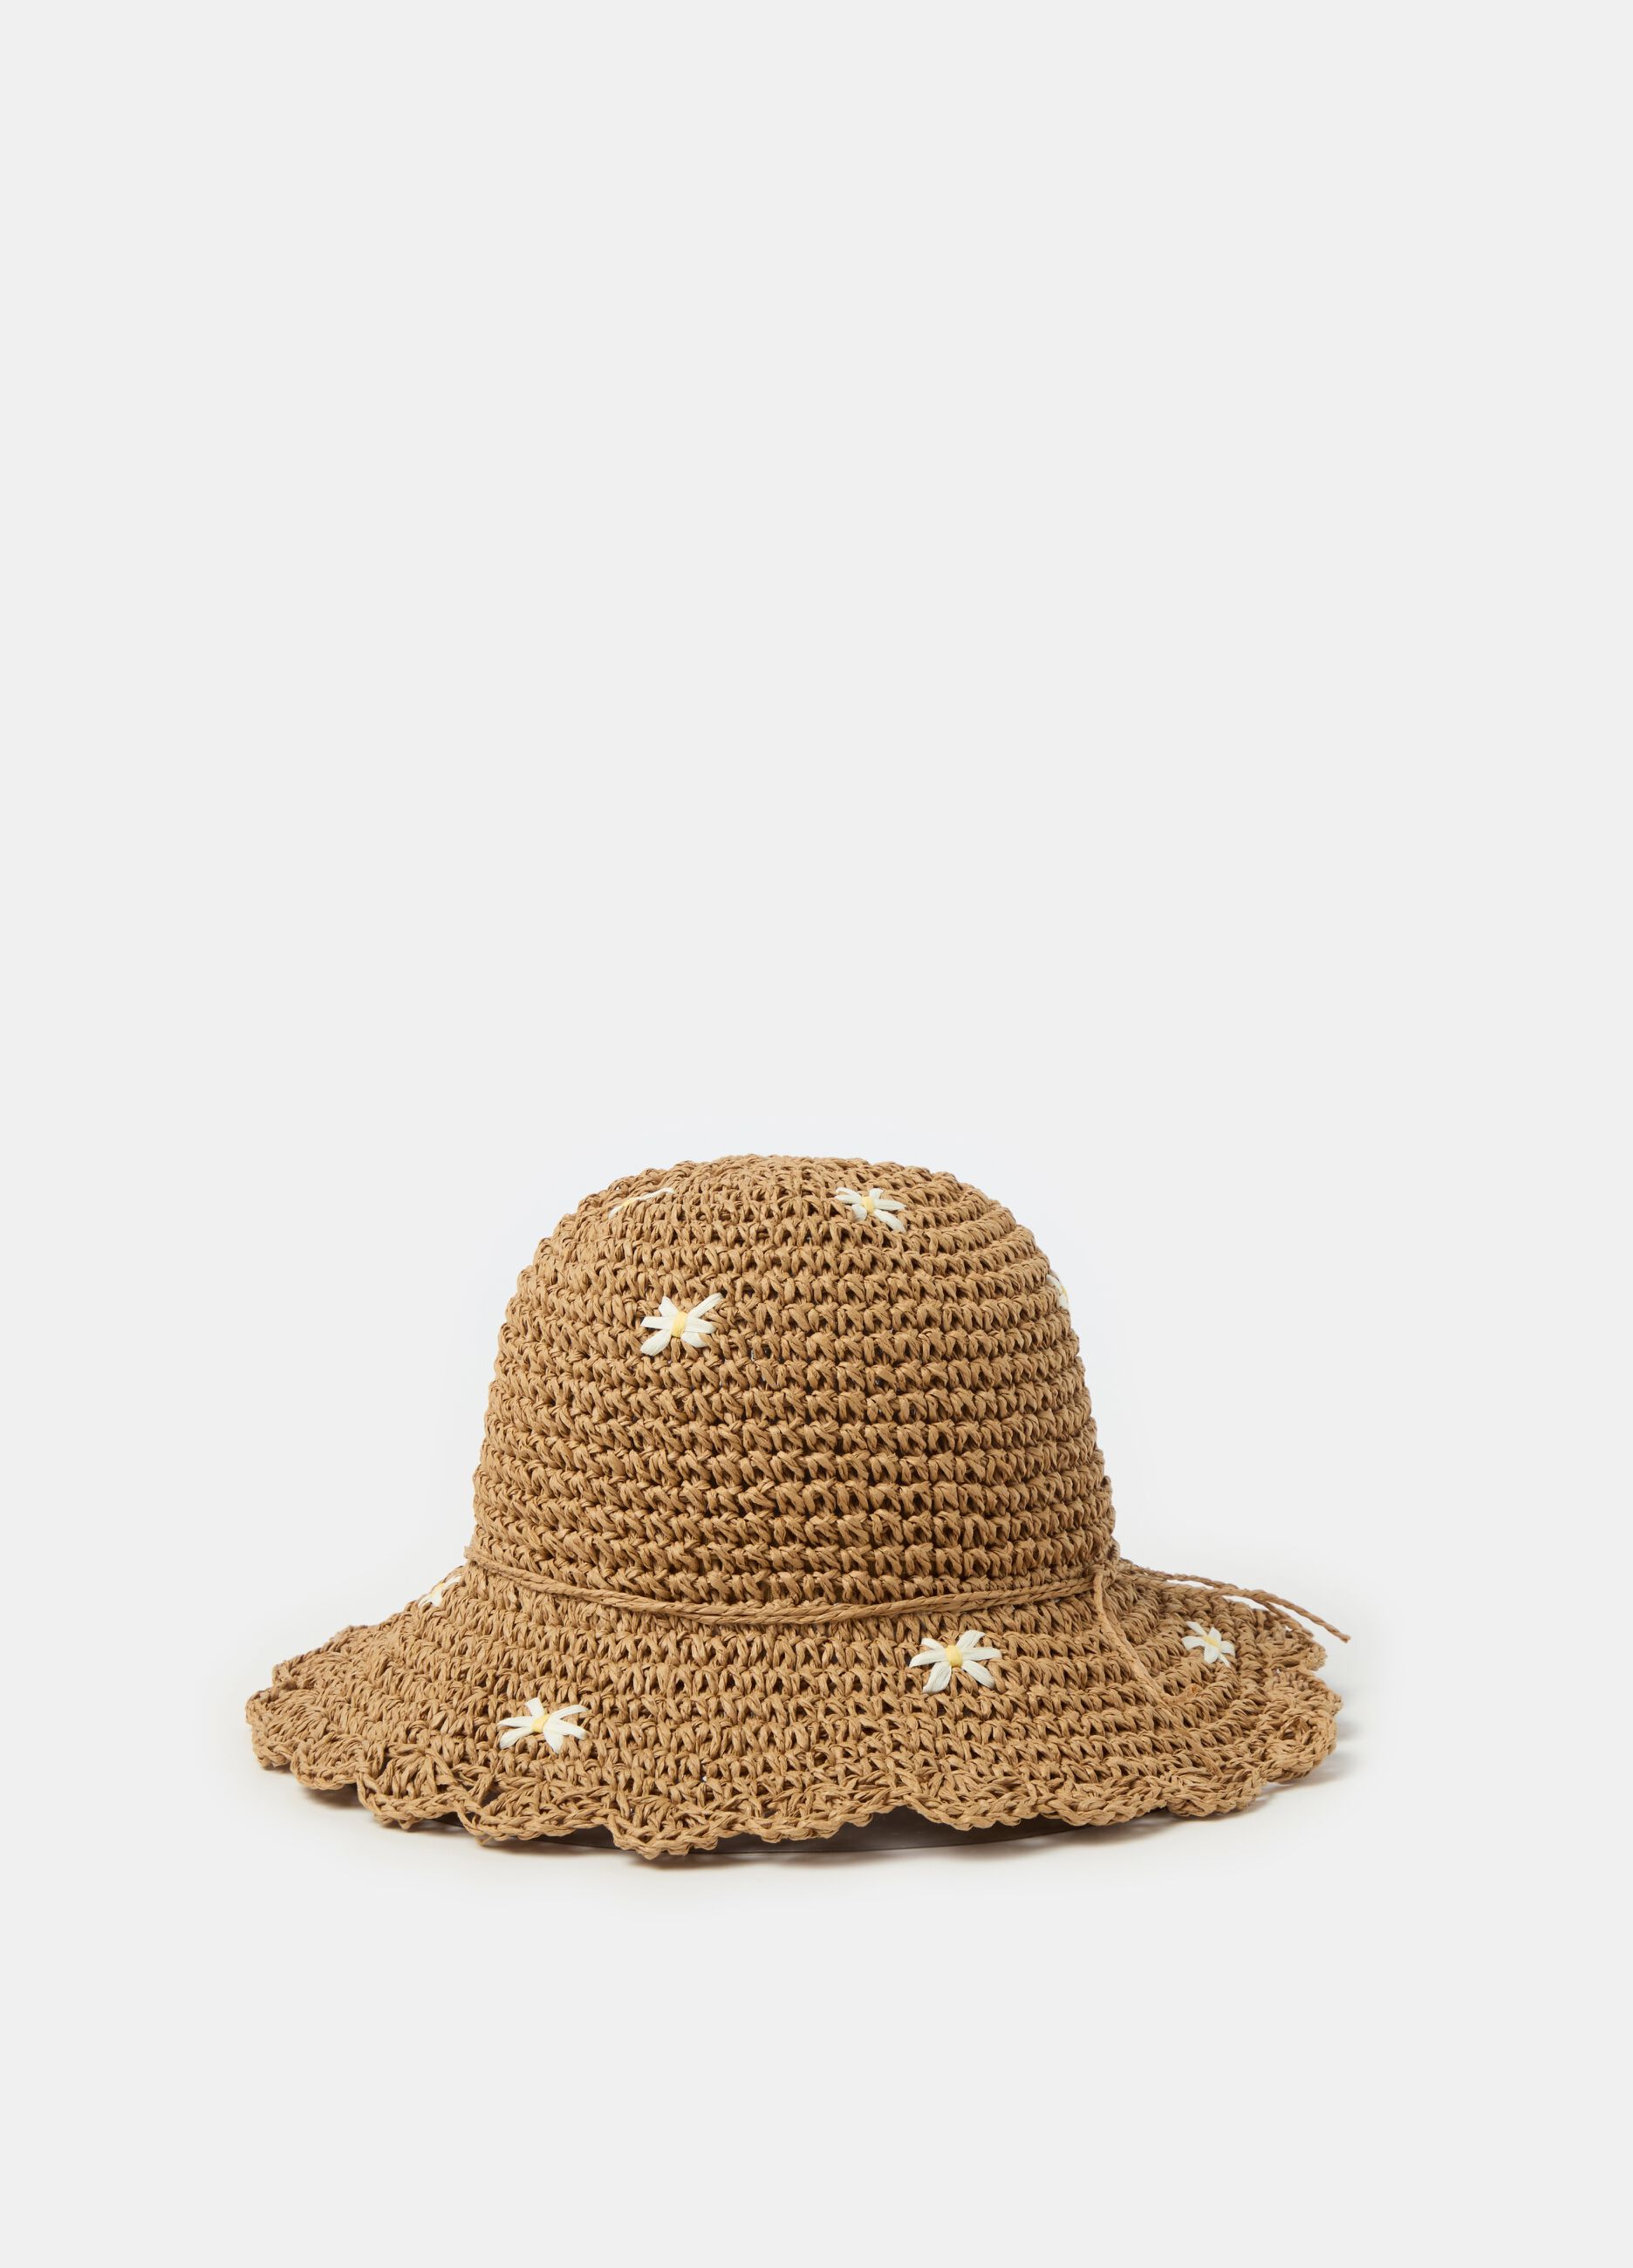 Straw hat with flowers